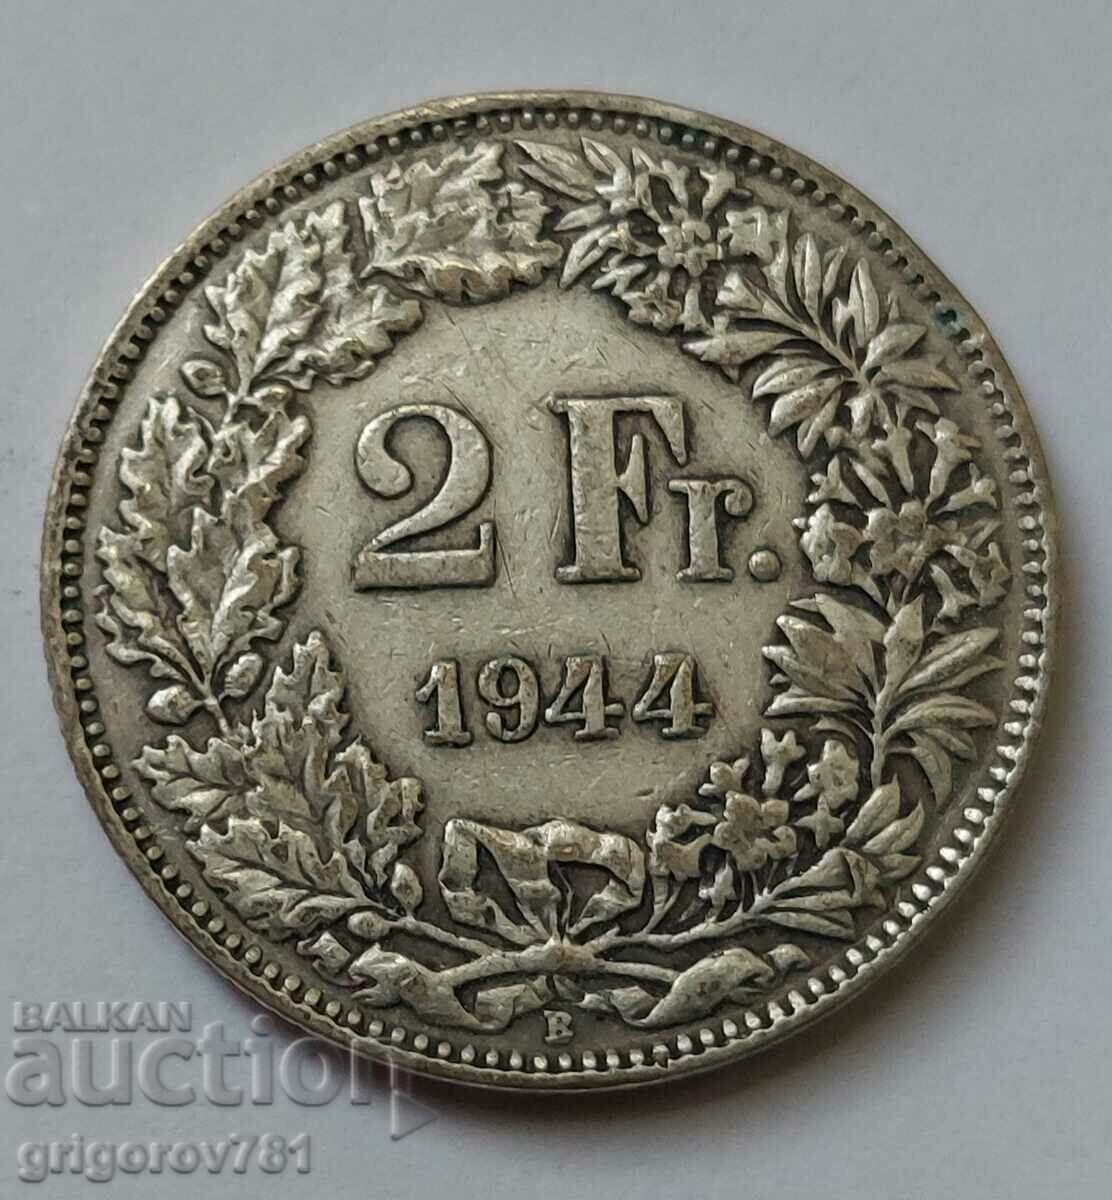 2 Francs Silver Switzerland 1944 B - Silver Coin #4